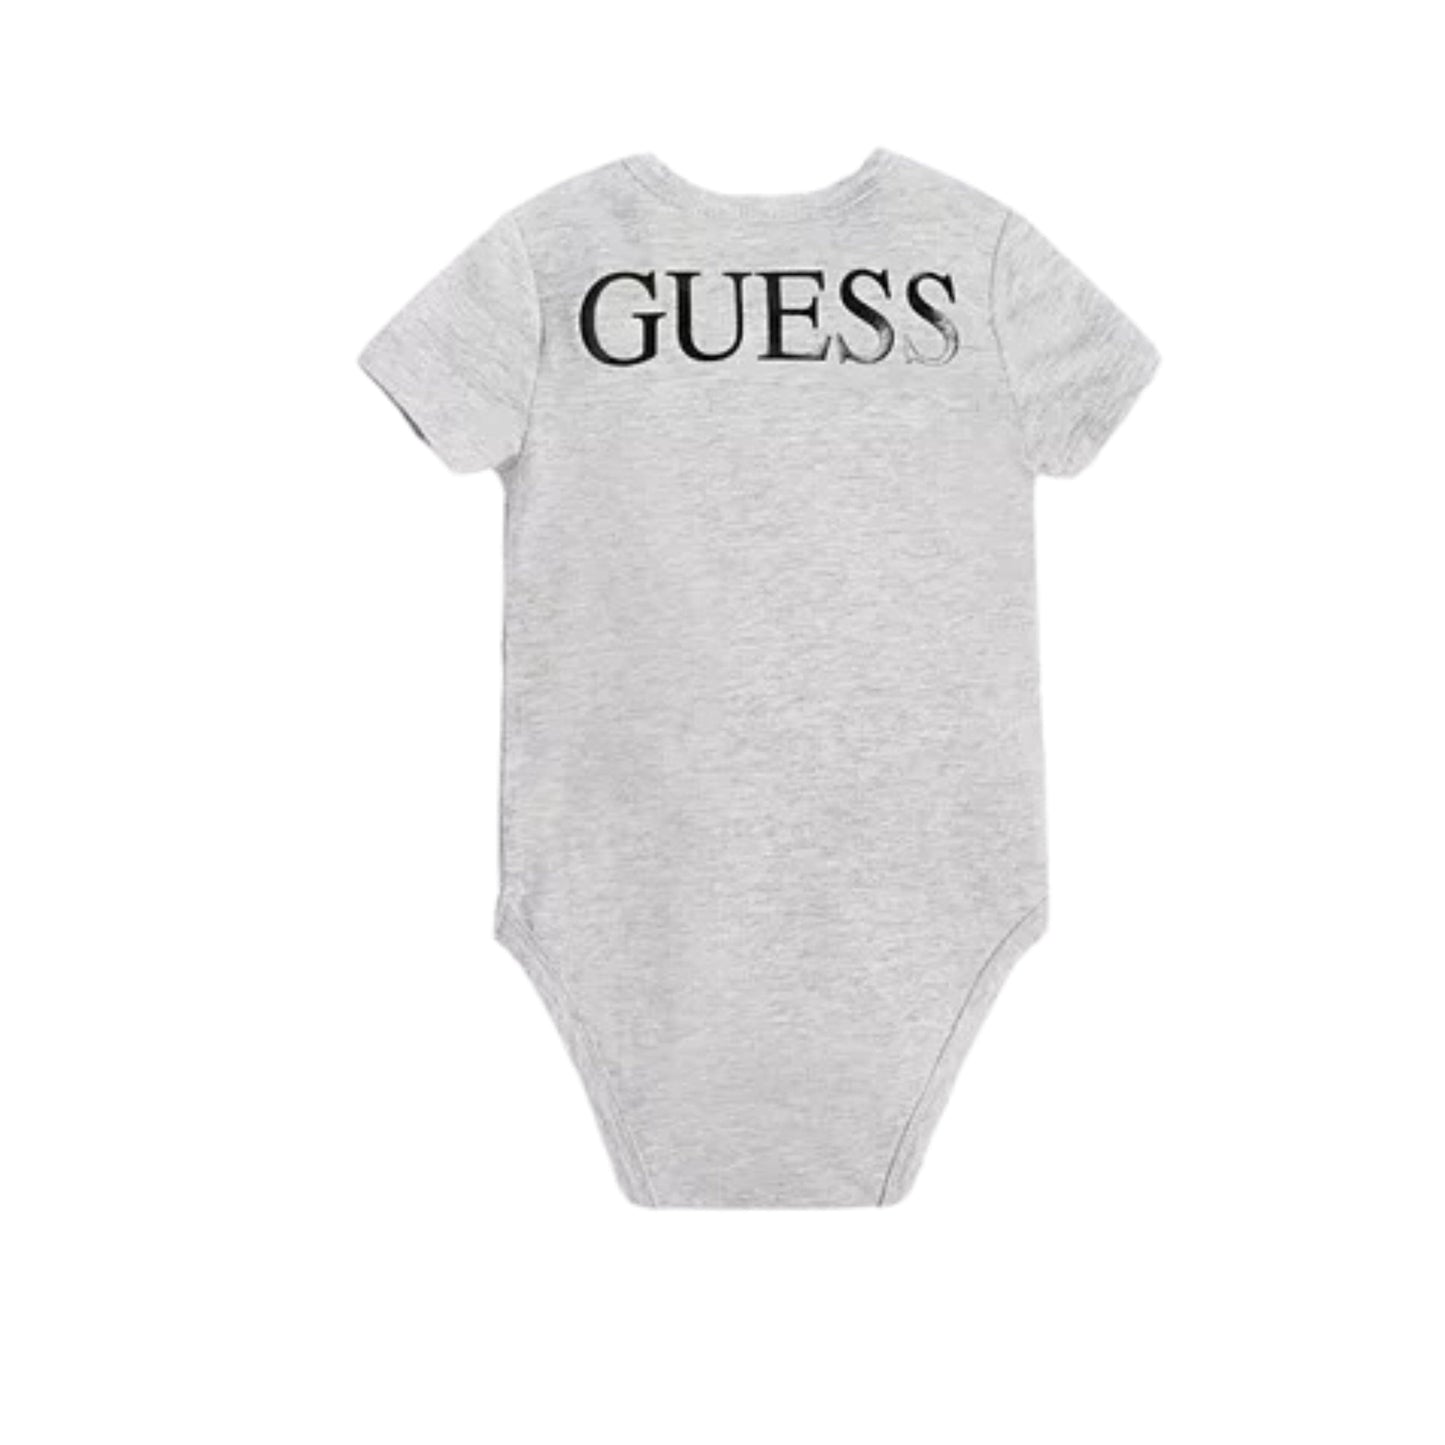 GUESS Baby Boy 3-6 Month / Grey GUESS - BABY -  Applique Bodysuits